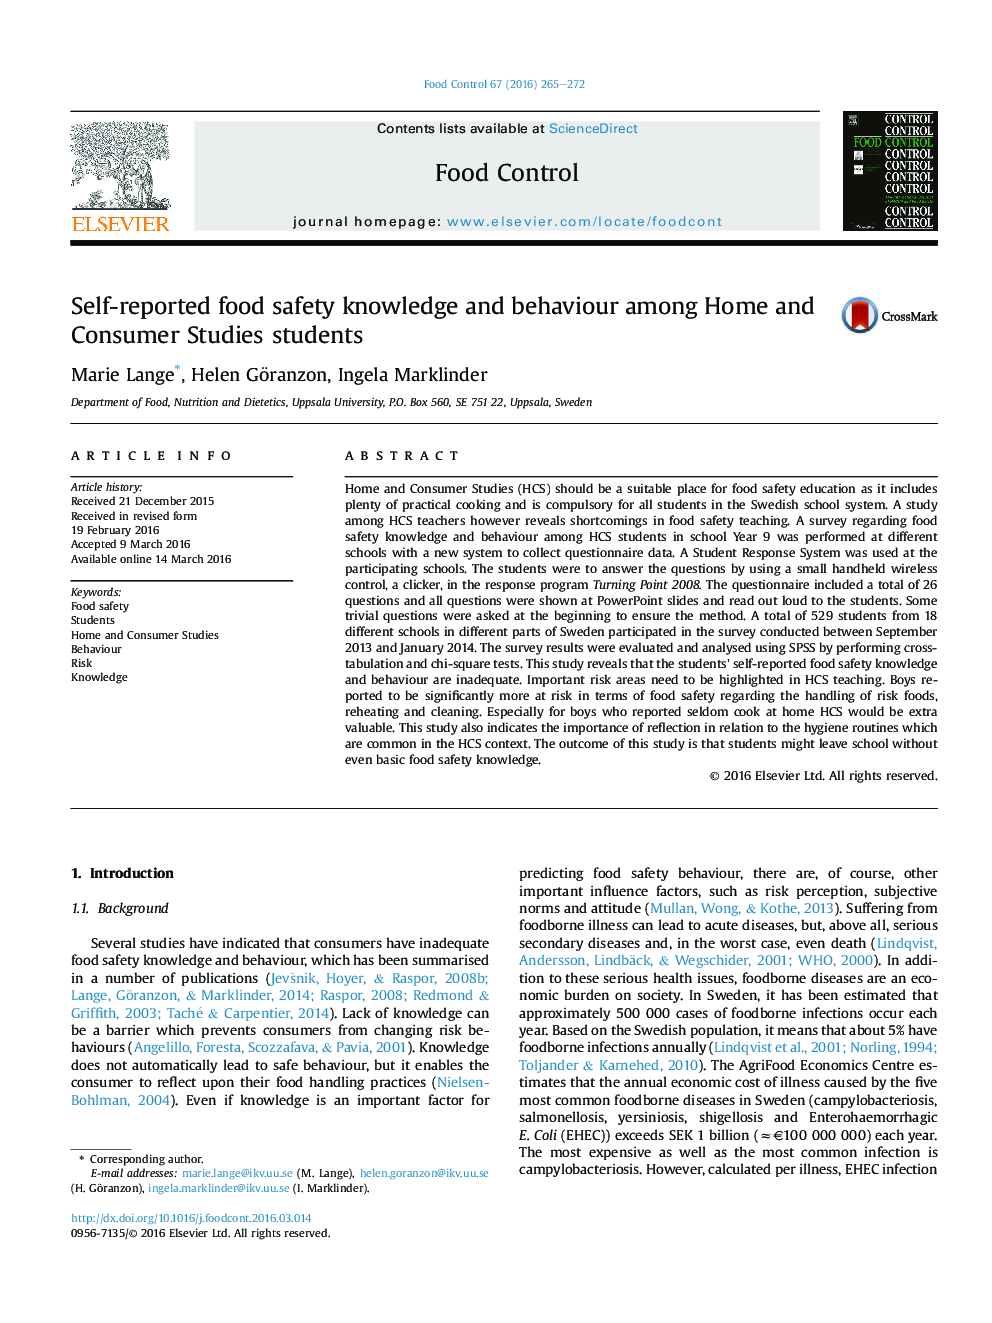 Self-reported food safety knowledge and behaviour among Home and Consumer Studies students